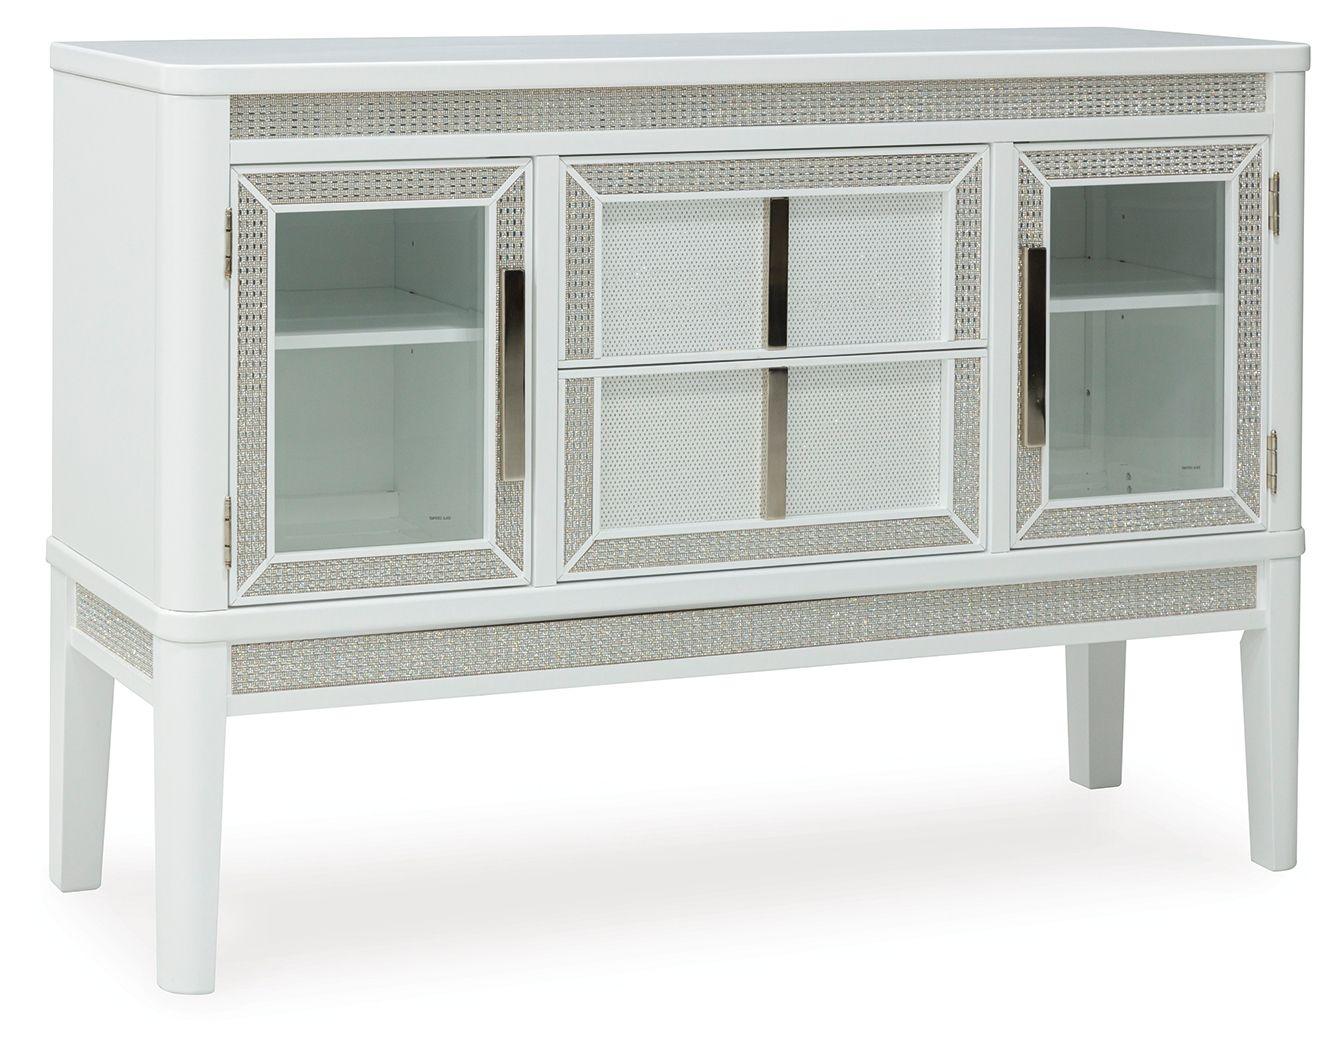 Signature Design by Ashley® - Chalanna - White - Dining Room Server - 5th Avenue Furniture